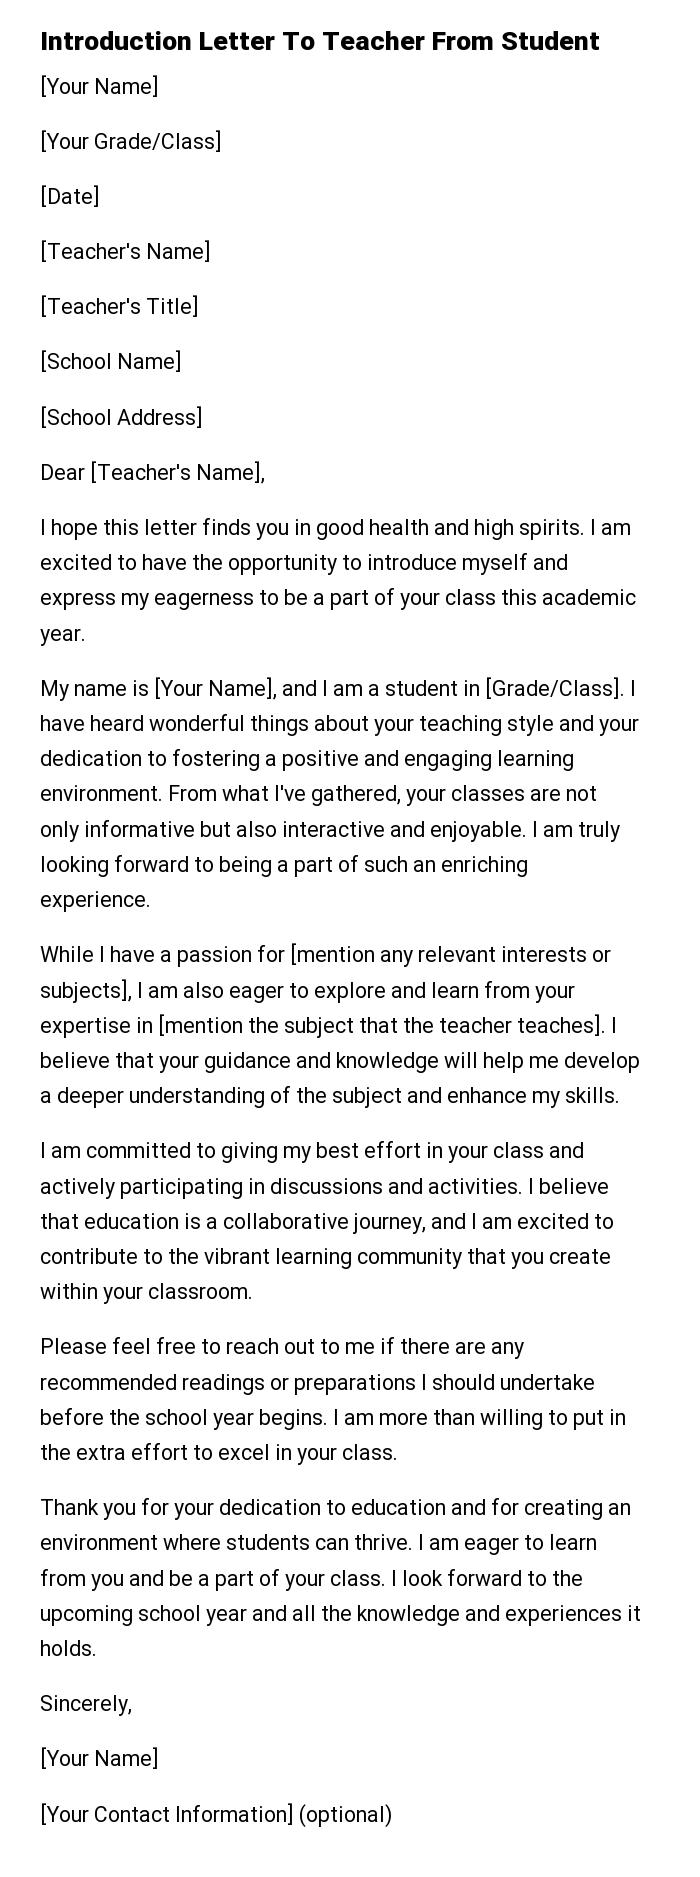 introduction-letter-to-teacher-from-student